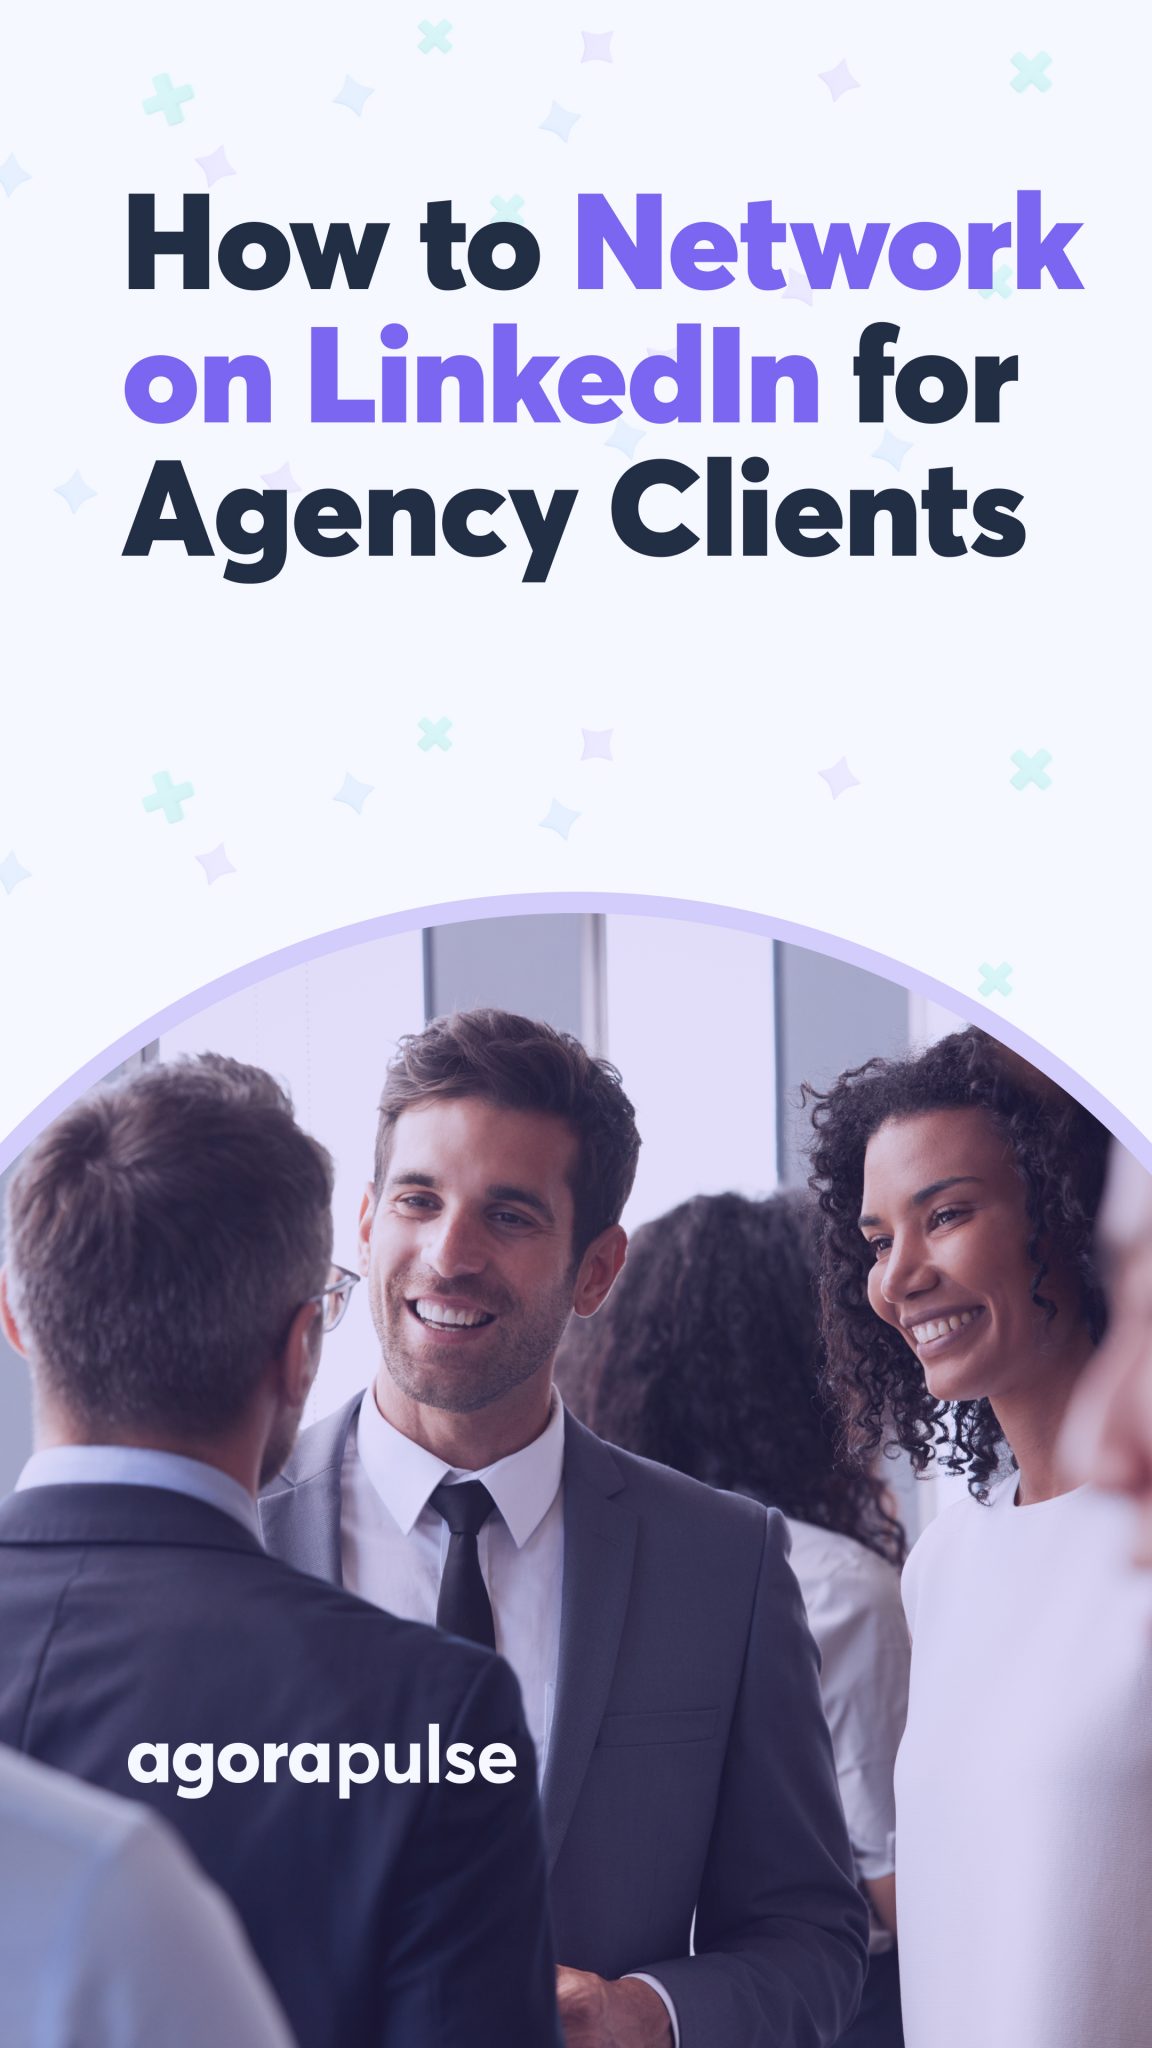 How to Network on LinkedIn for Agency Clients